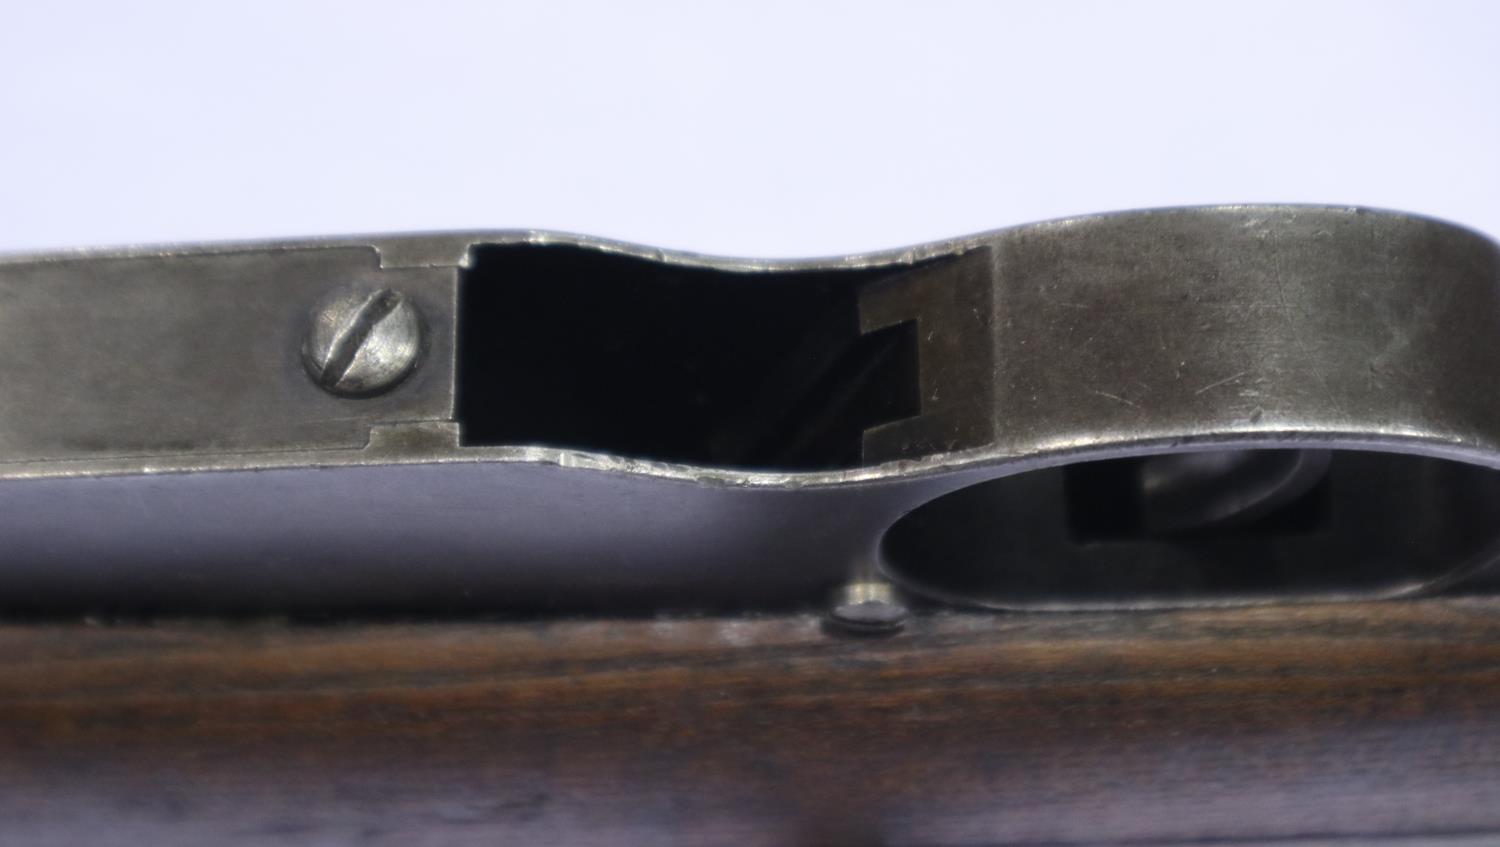 Steyr Mannlicher M95 straight pull service rifle, numbered 9953, deactivated to current EU - Image 8 of 8